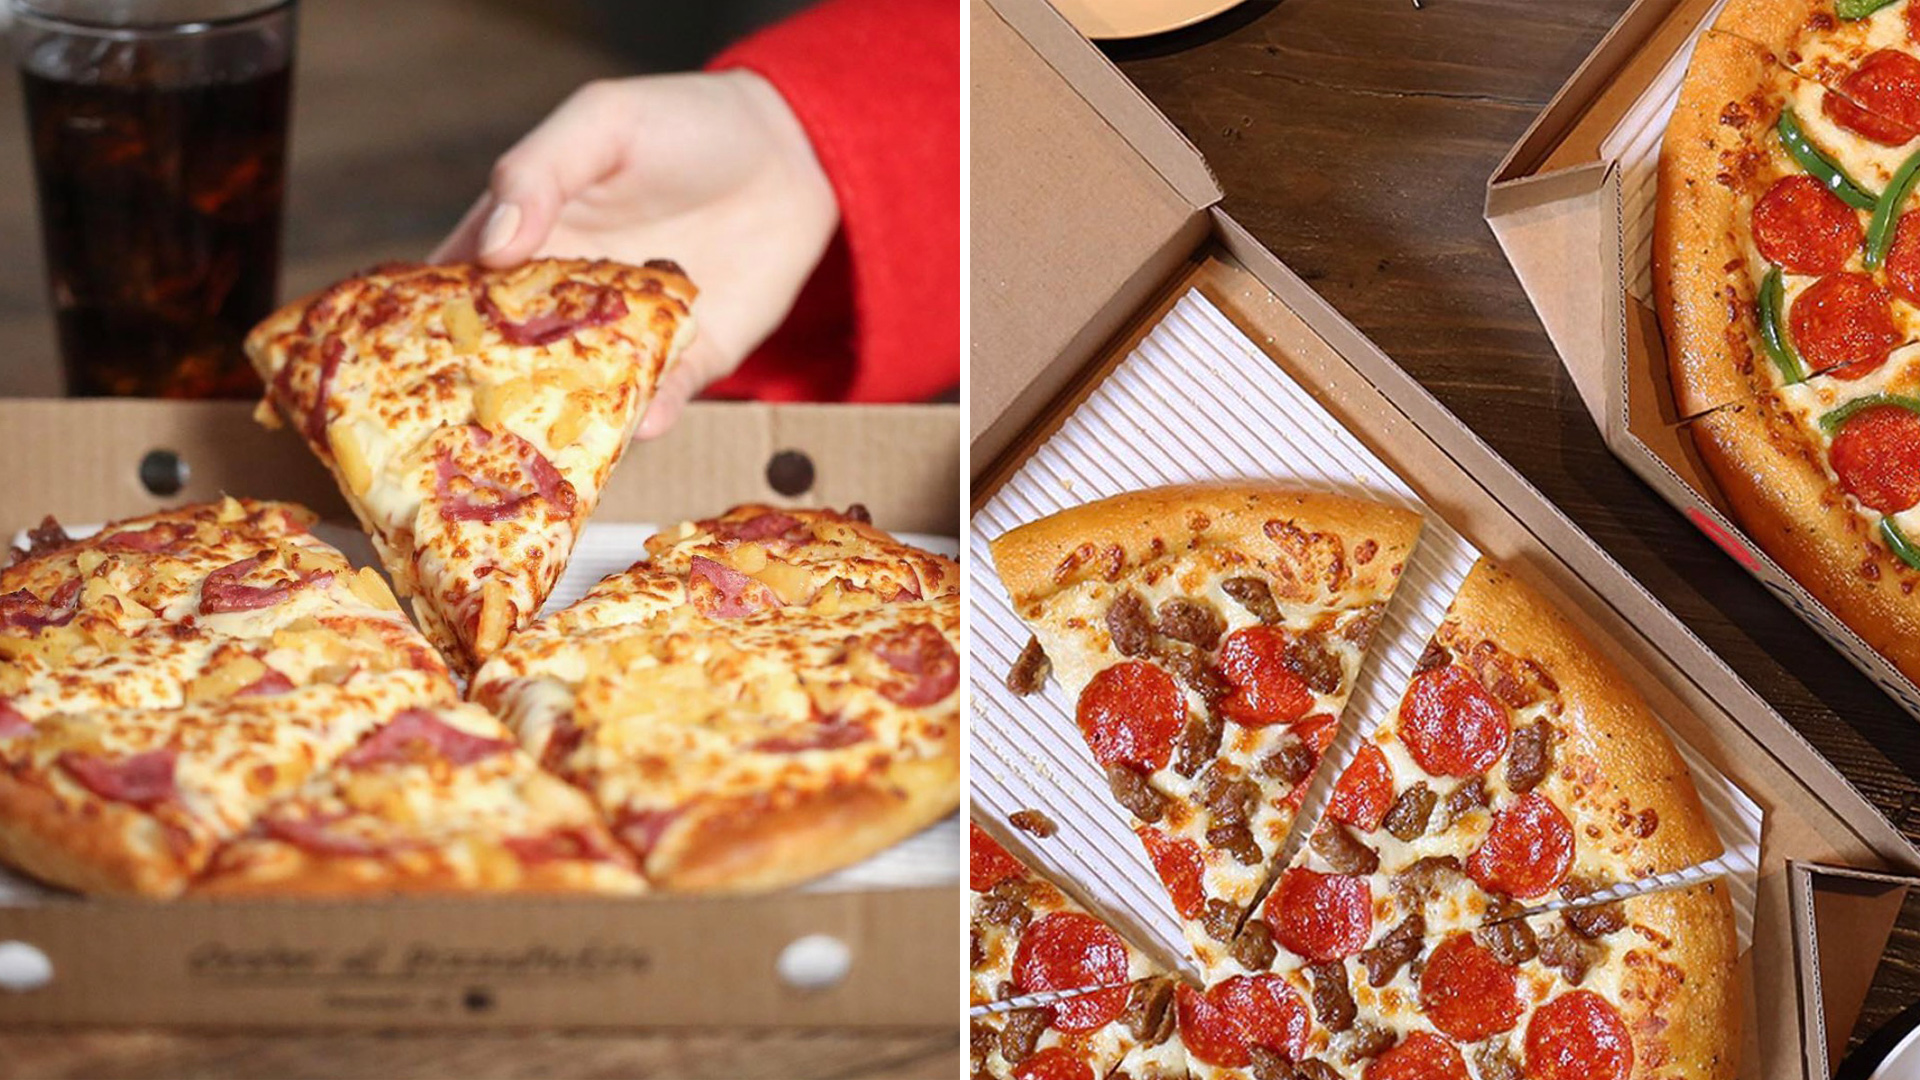 You Can Get BuyOneGetOne Free Pizzas At Pizza Hut Right Now